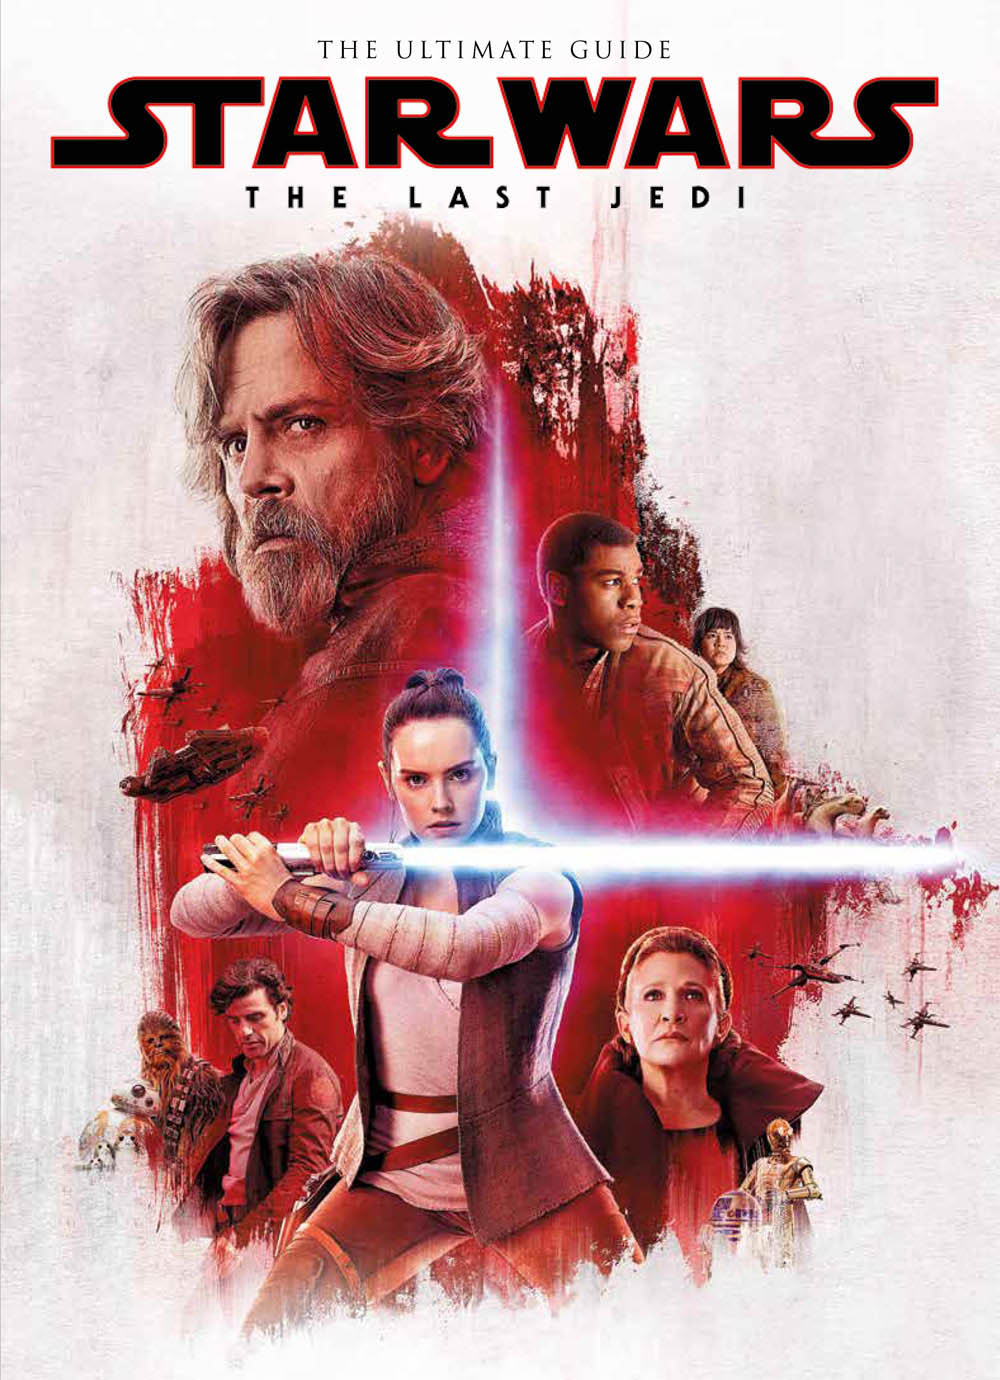 Star Wars: The Last Jedi The Visual Dictionary & Incredible Cross